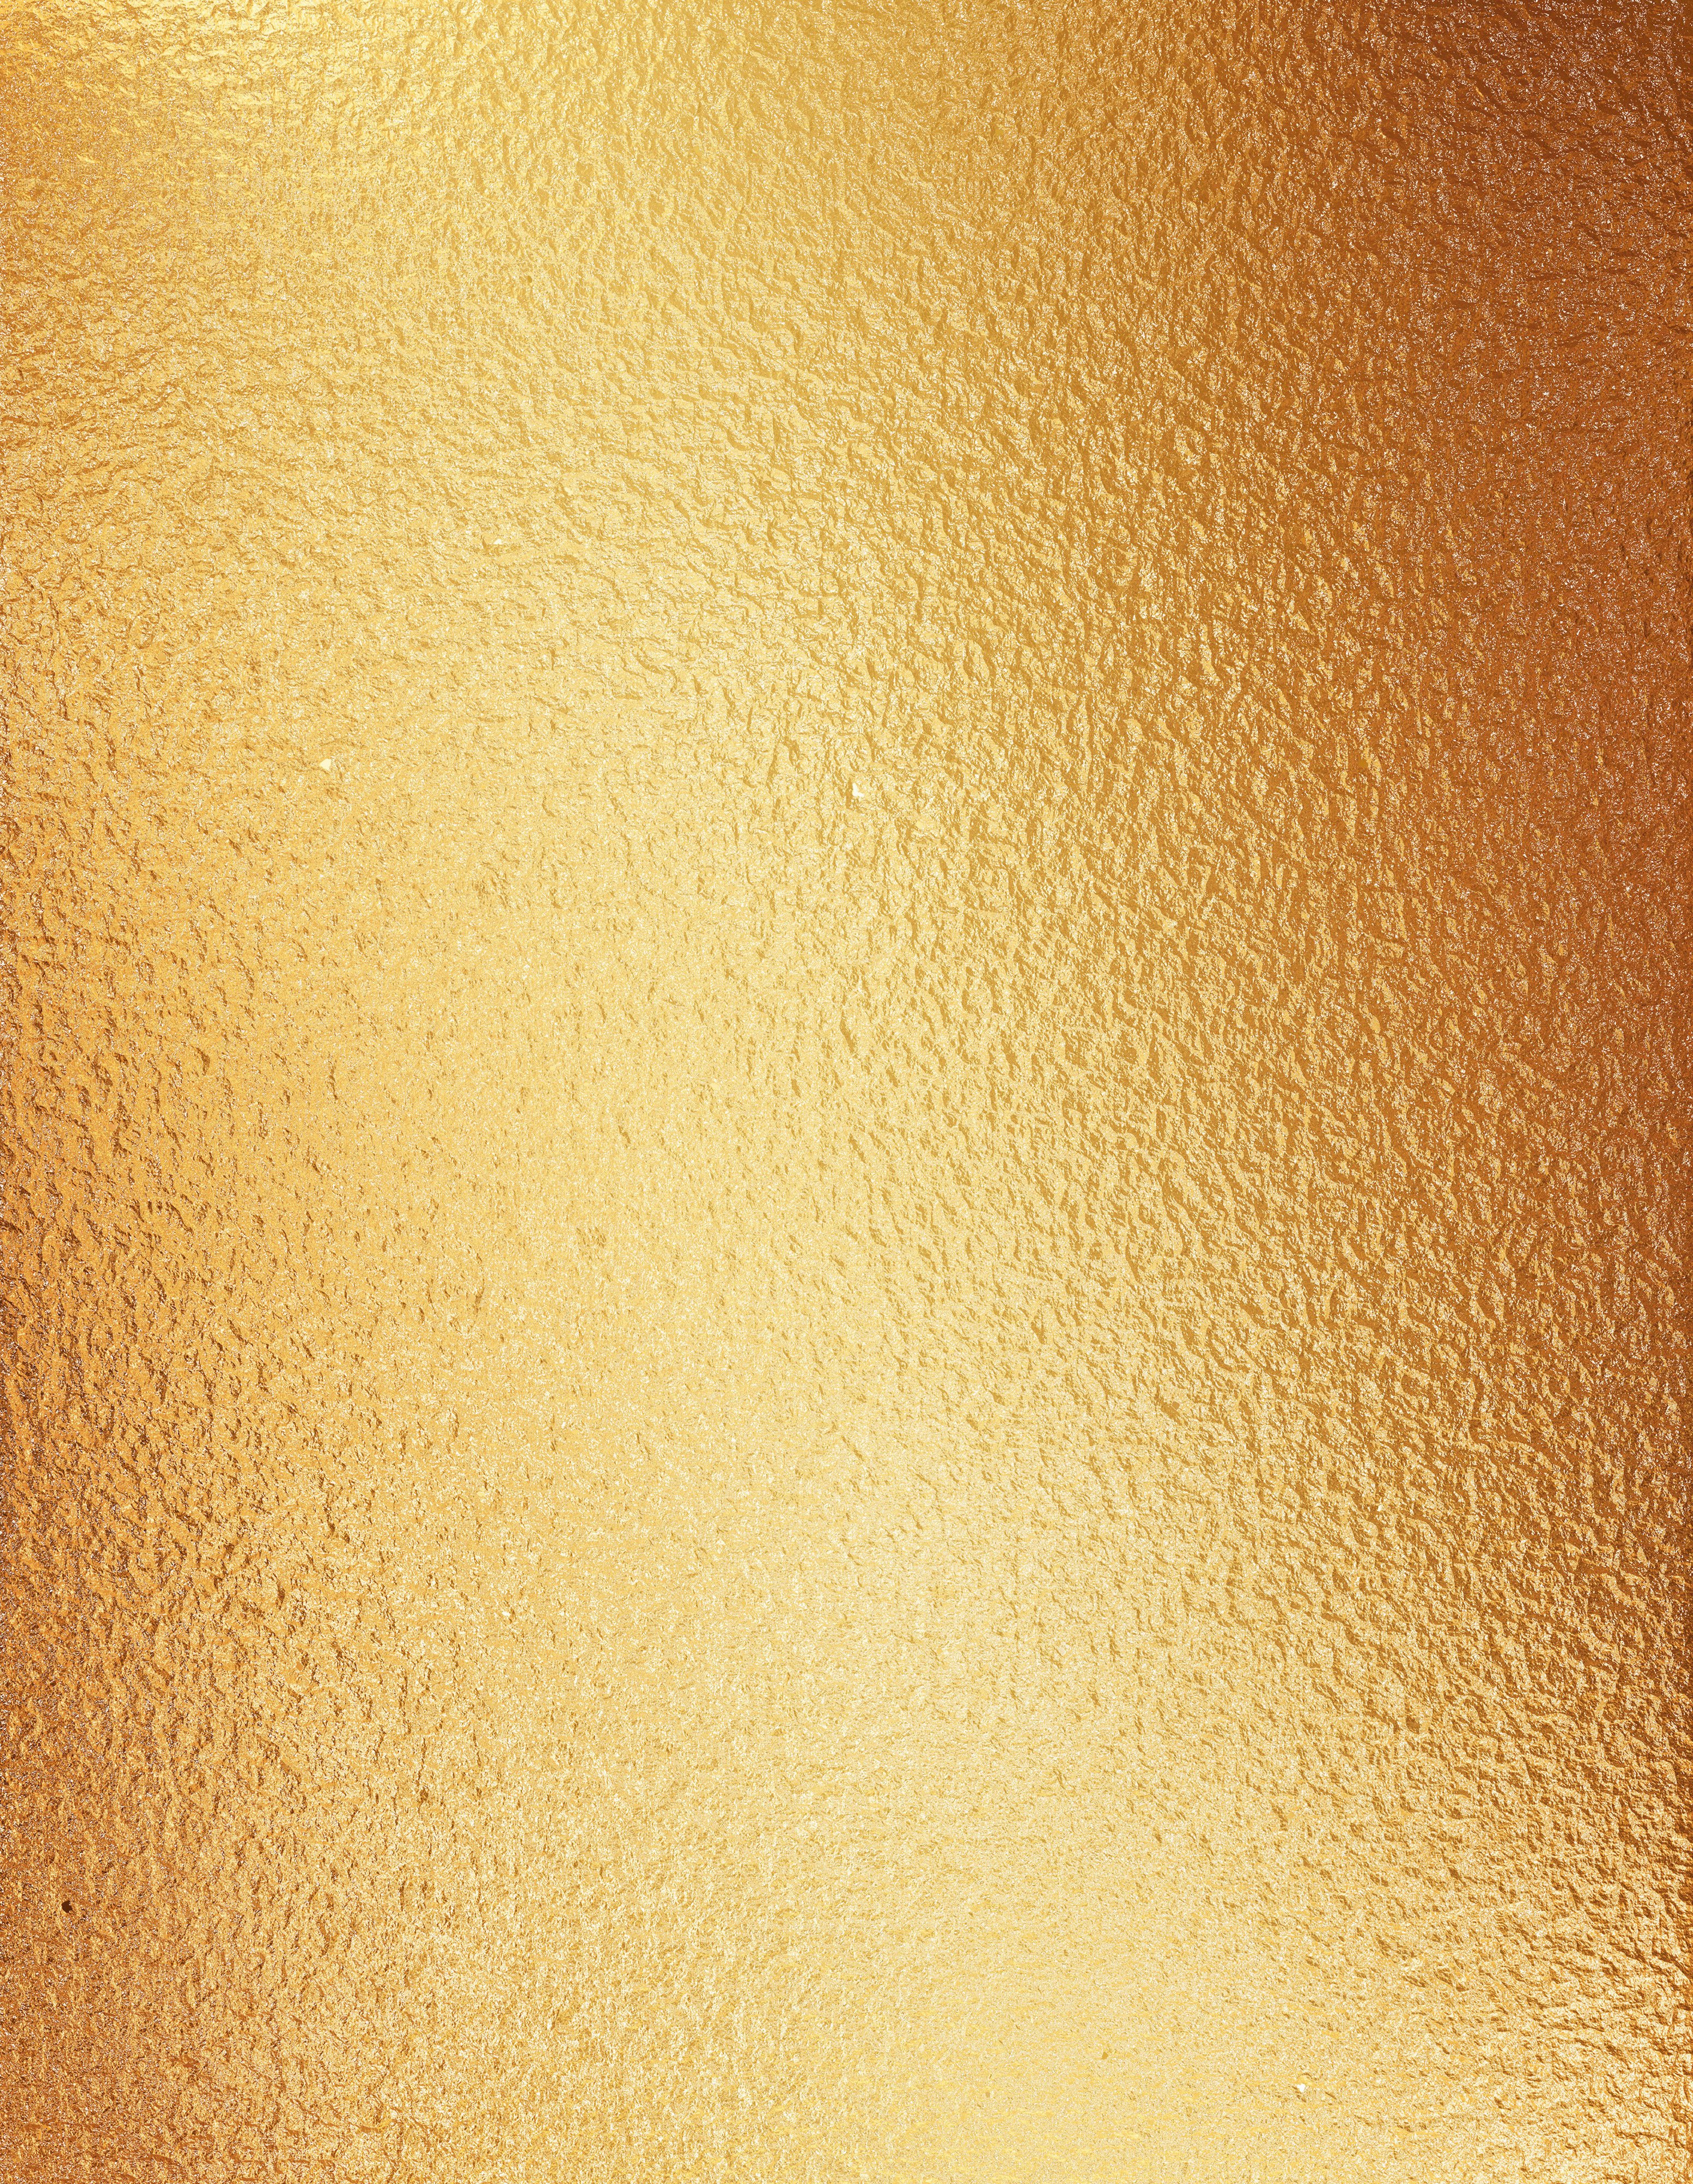 Gold Foil Texture Free How to Make A Shiny Shiny Effect with Shop Gold Foil